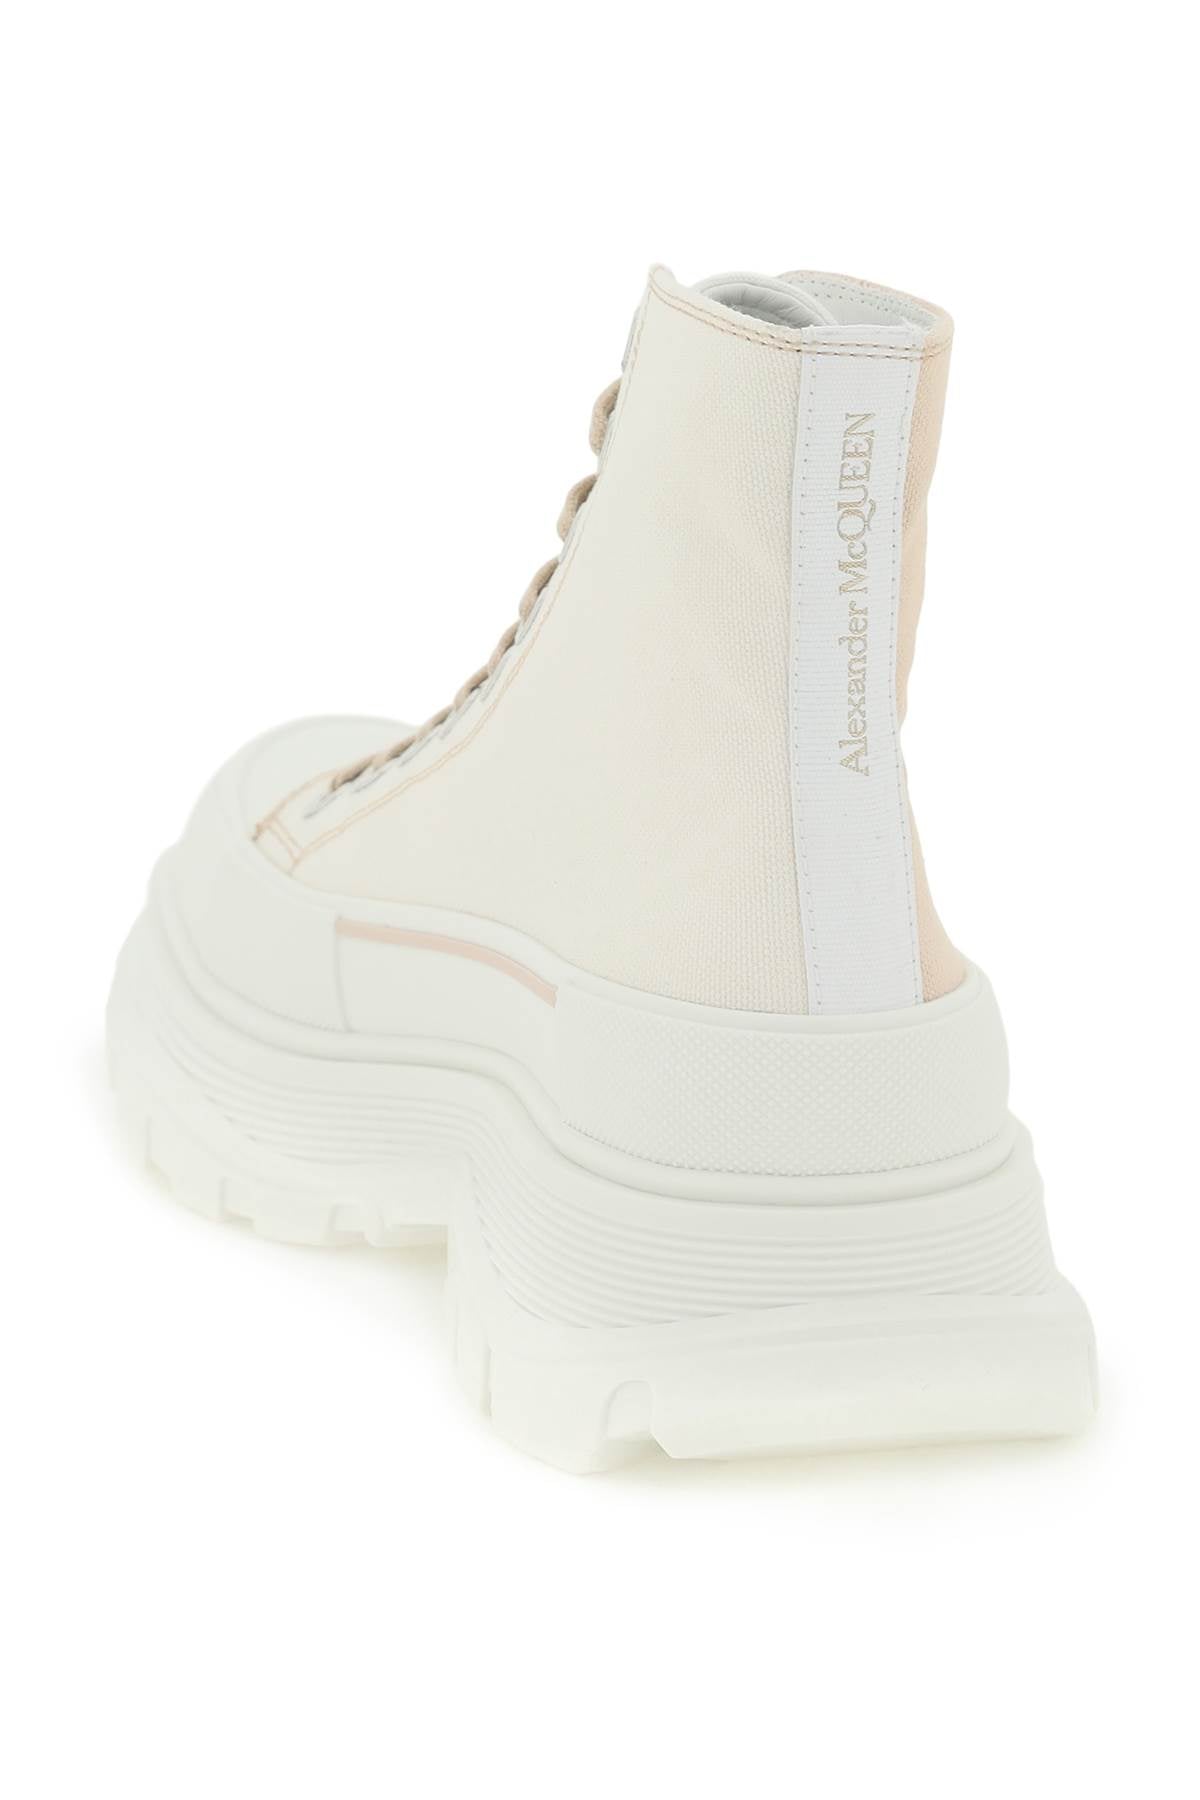 ALEXANDER MCQUEEN Tread Sleek Ankle Boots in Mixed Colours for Women